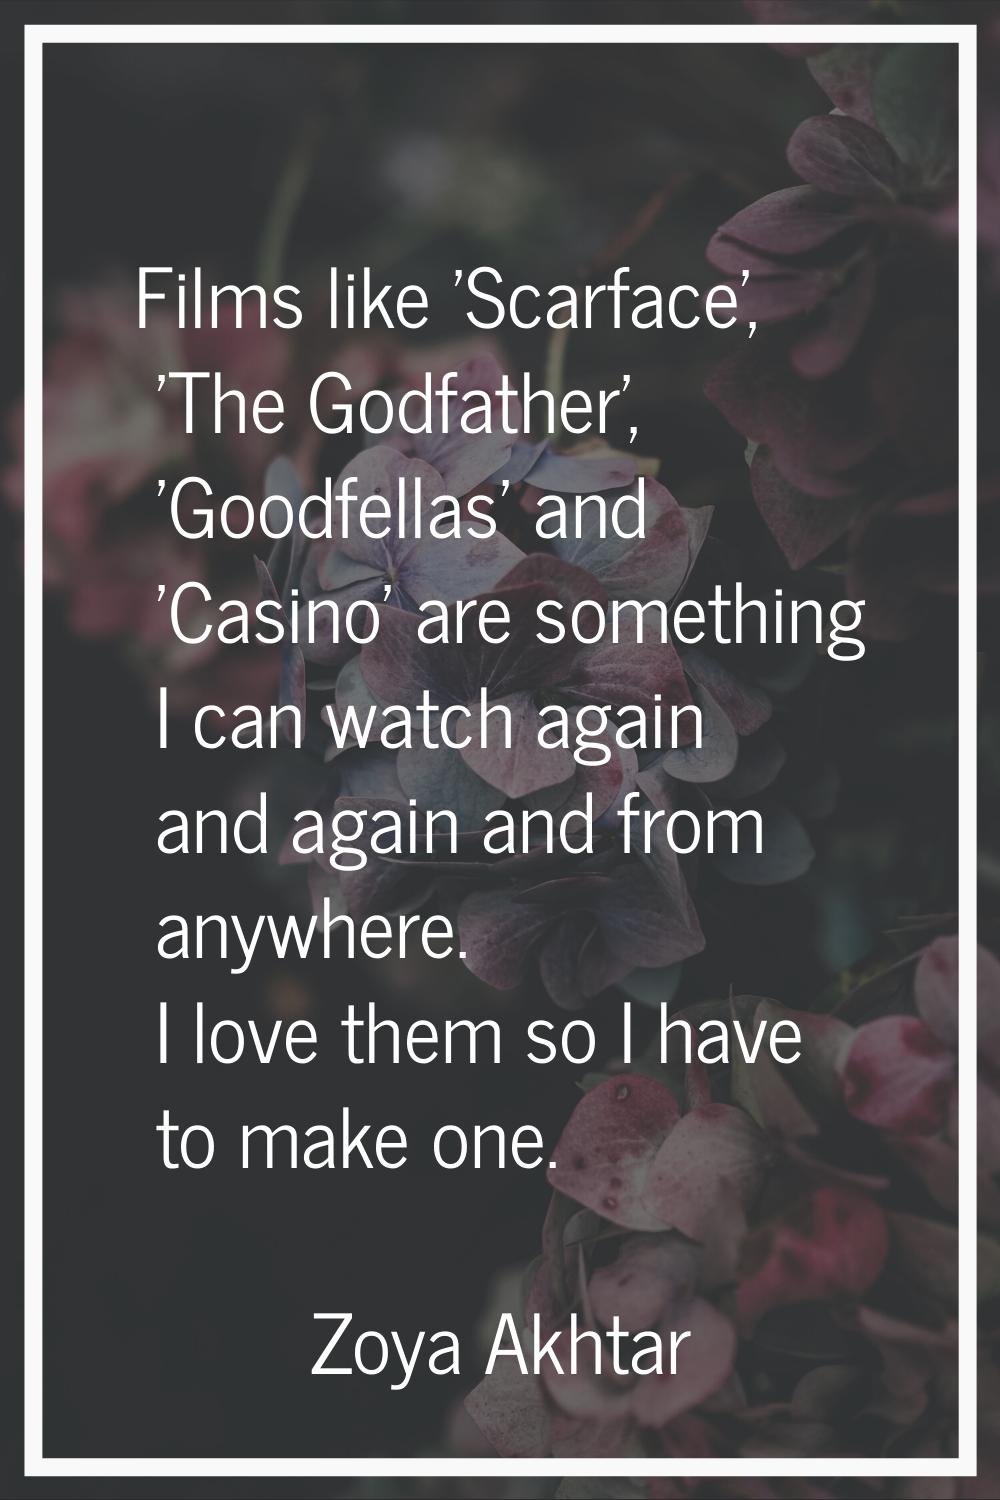 Films like 'Scarface', 'The Godfather', 'Goodfellas' and 'Casino' are something I can watch again a